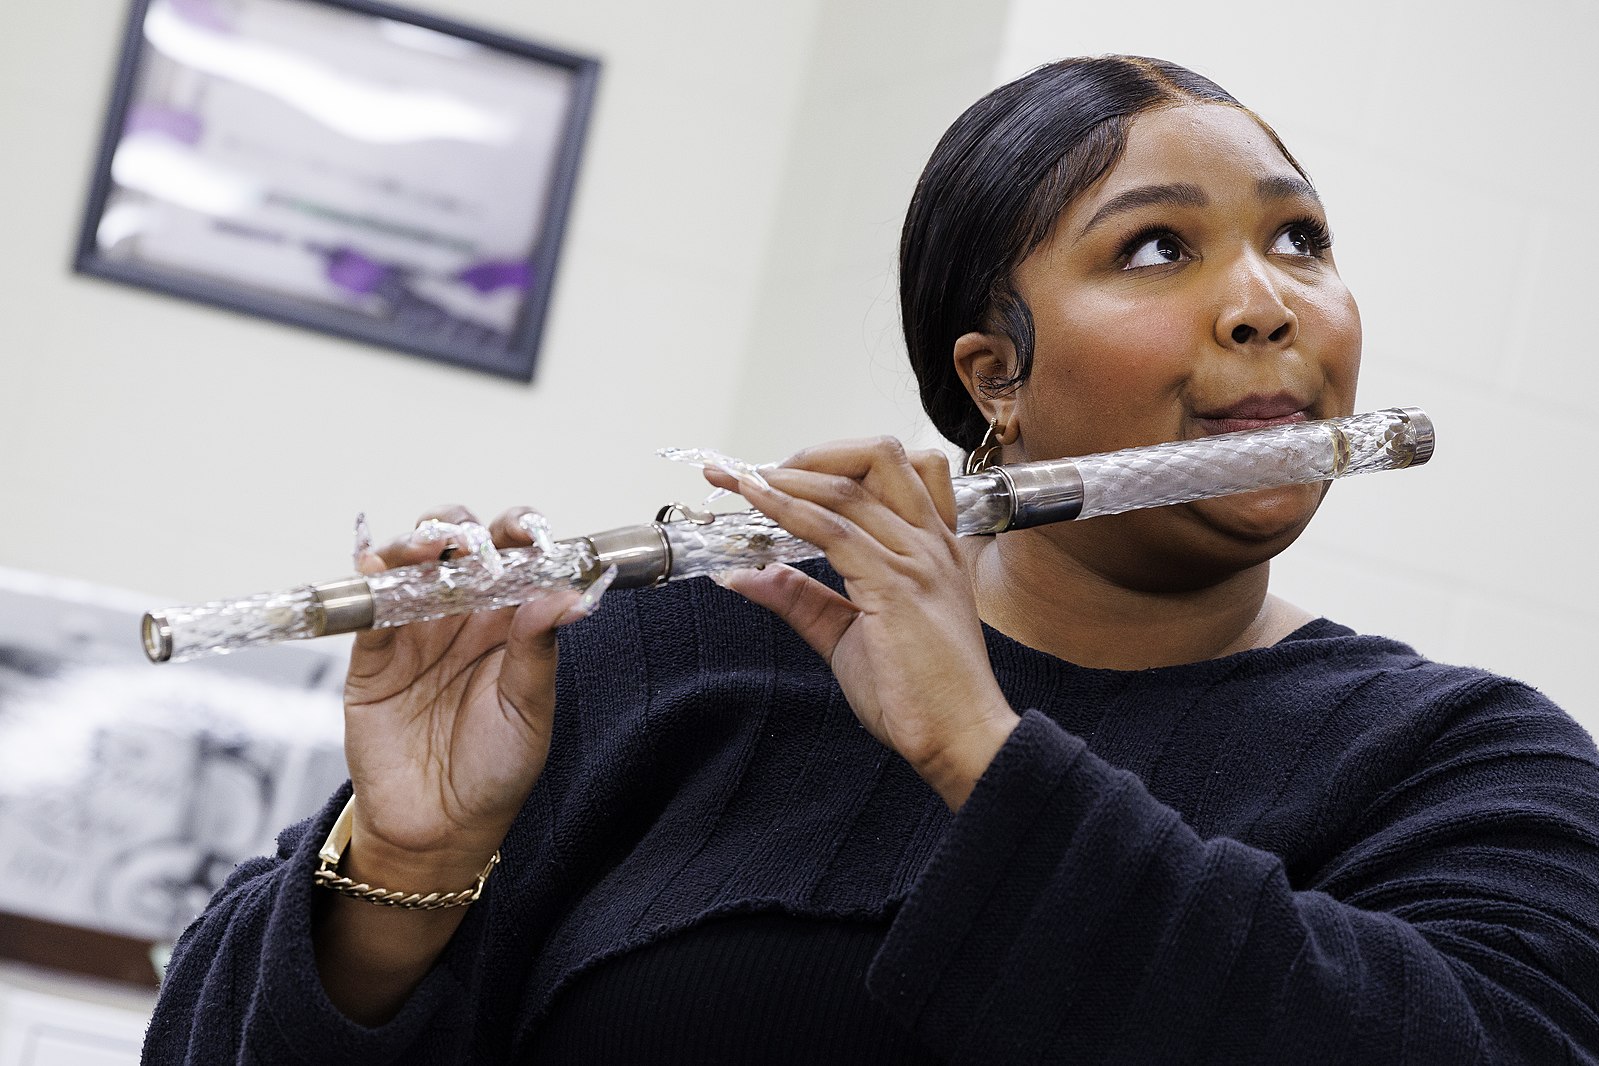 Lizzo plays President James Madison's 1813 crystal flute in the flute vault at the Library of Congress, September 26, 2022. Photo by Shawn Miller/Library of Congress. Privacy and publicity rights for individuals depicted may apply.